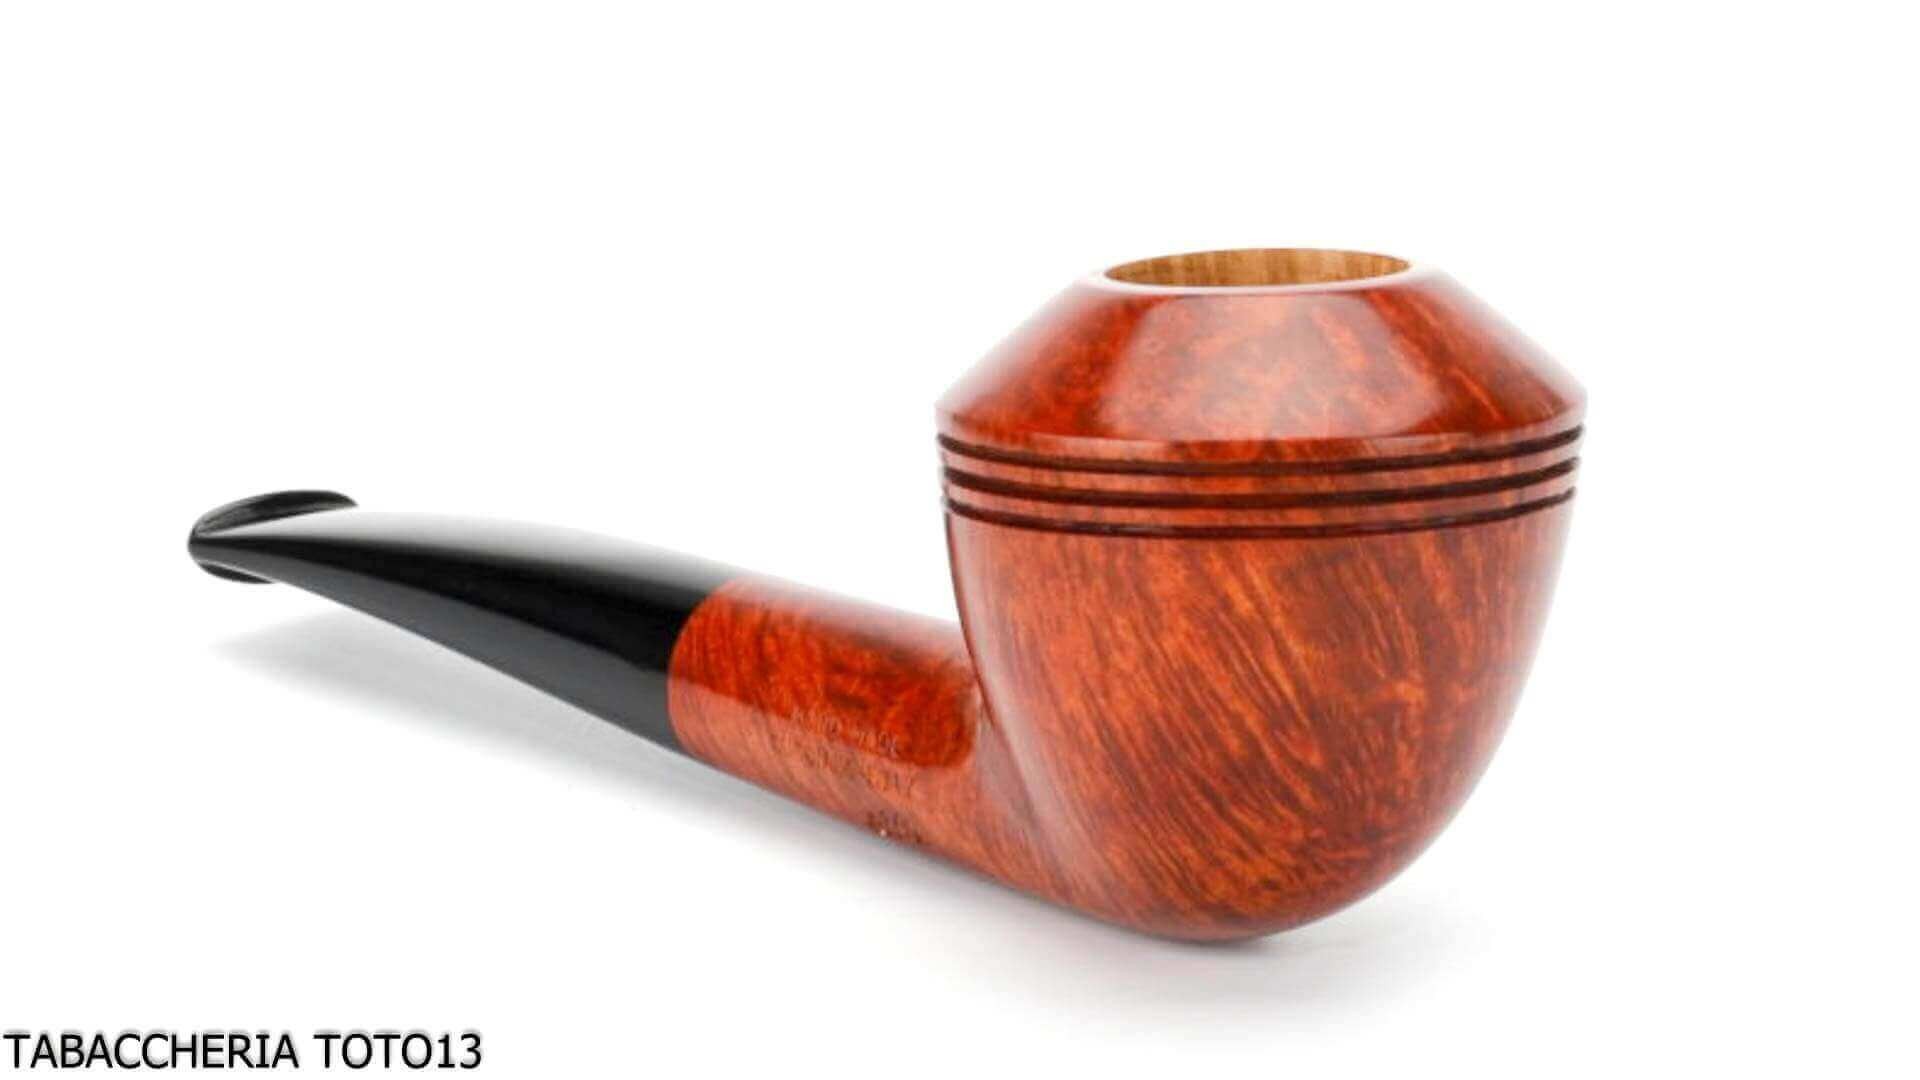 Pipe Ascorti Nus Rhodesian natural root | Online sale and shipping